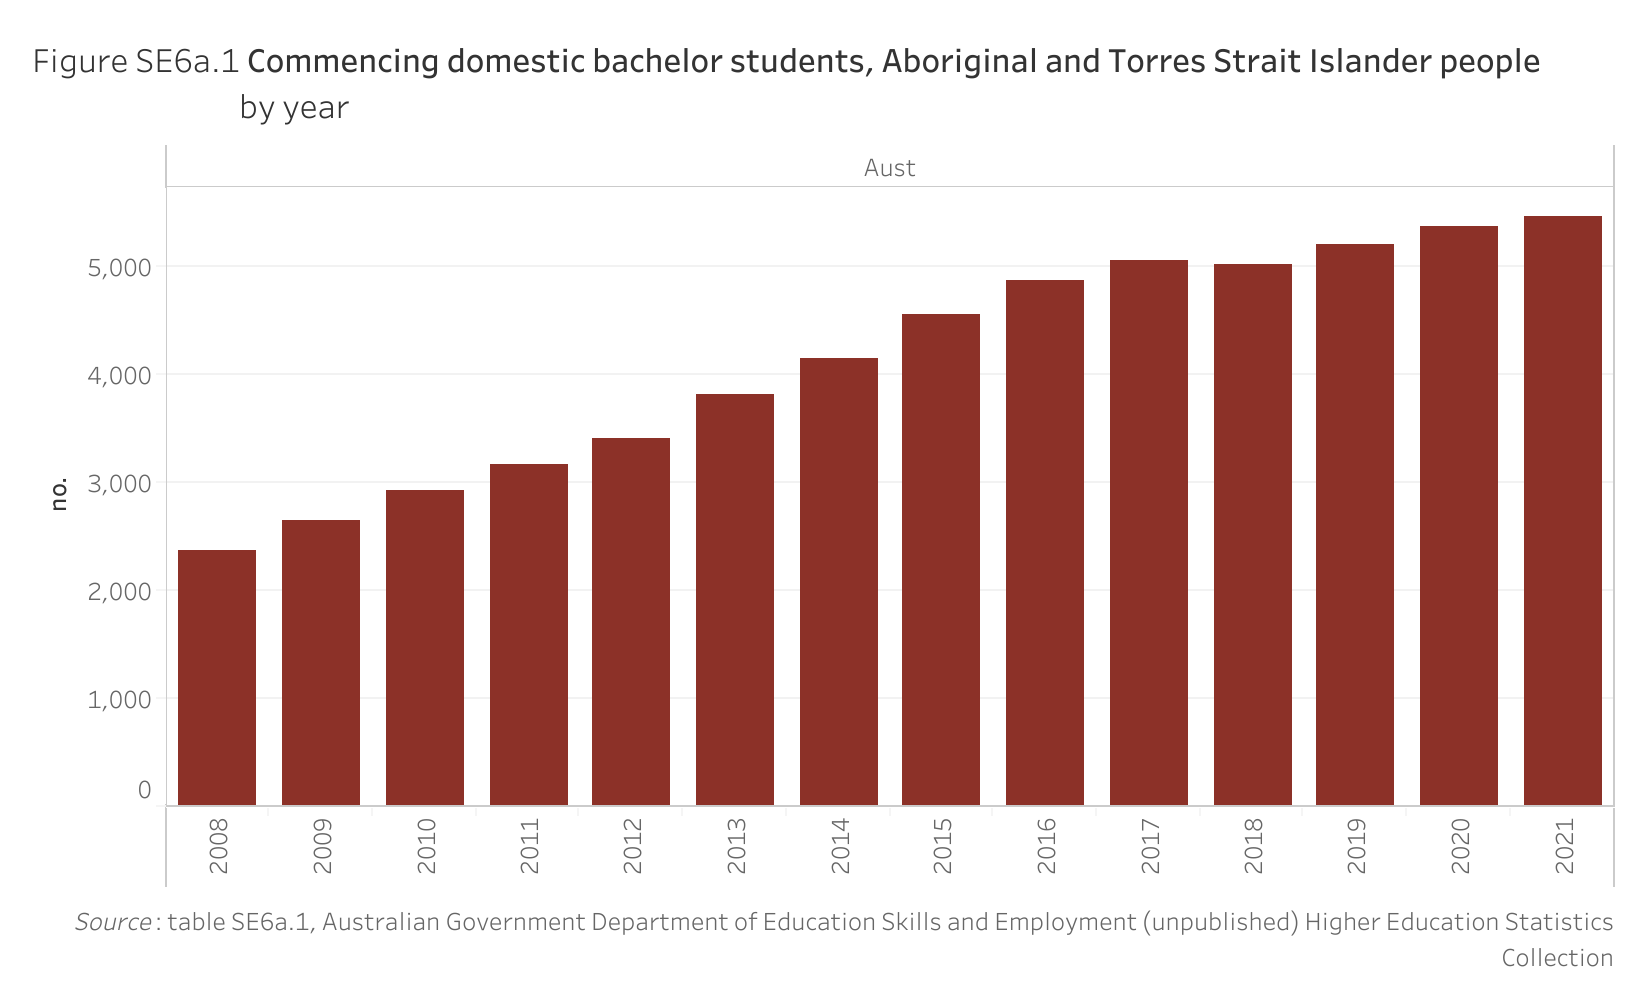 Figure SE6a.1 shows the commencing domestic bachelor students, Aboriginal and Torres Strait Islander people, by year. More details can be found within the text near this image.